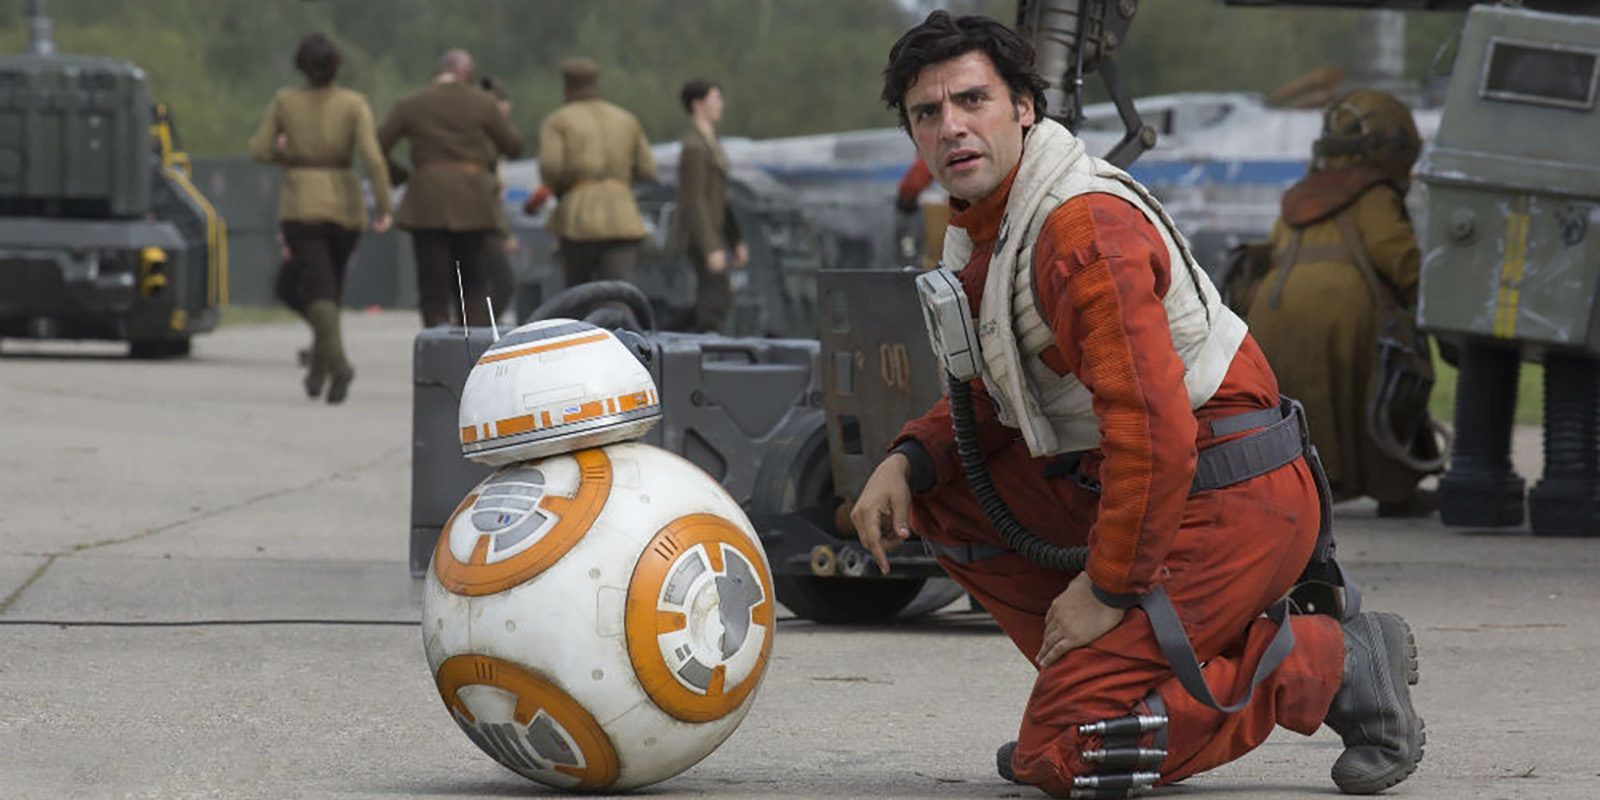 Poe Dameron and BB-8 are reunited in The Force Awakens